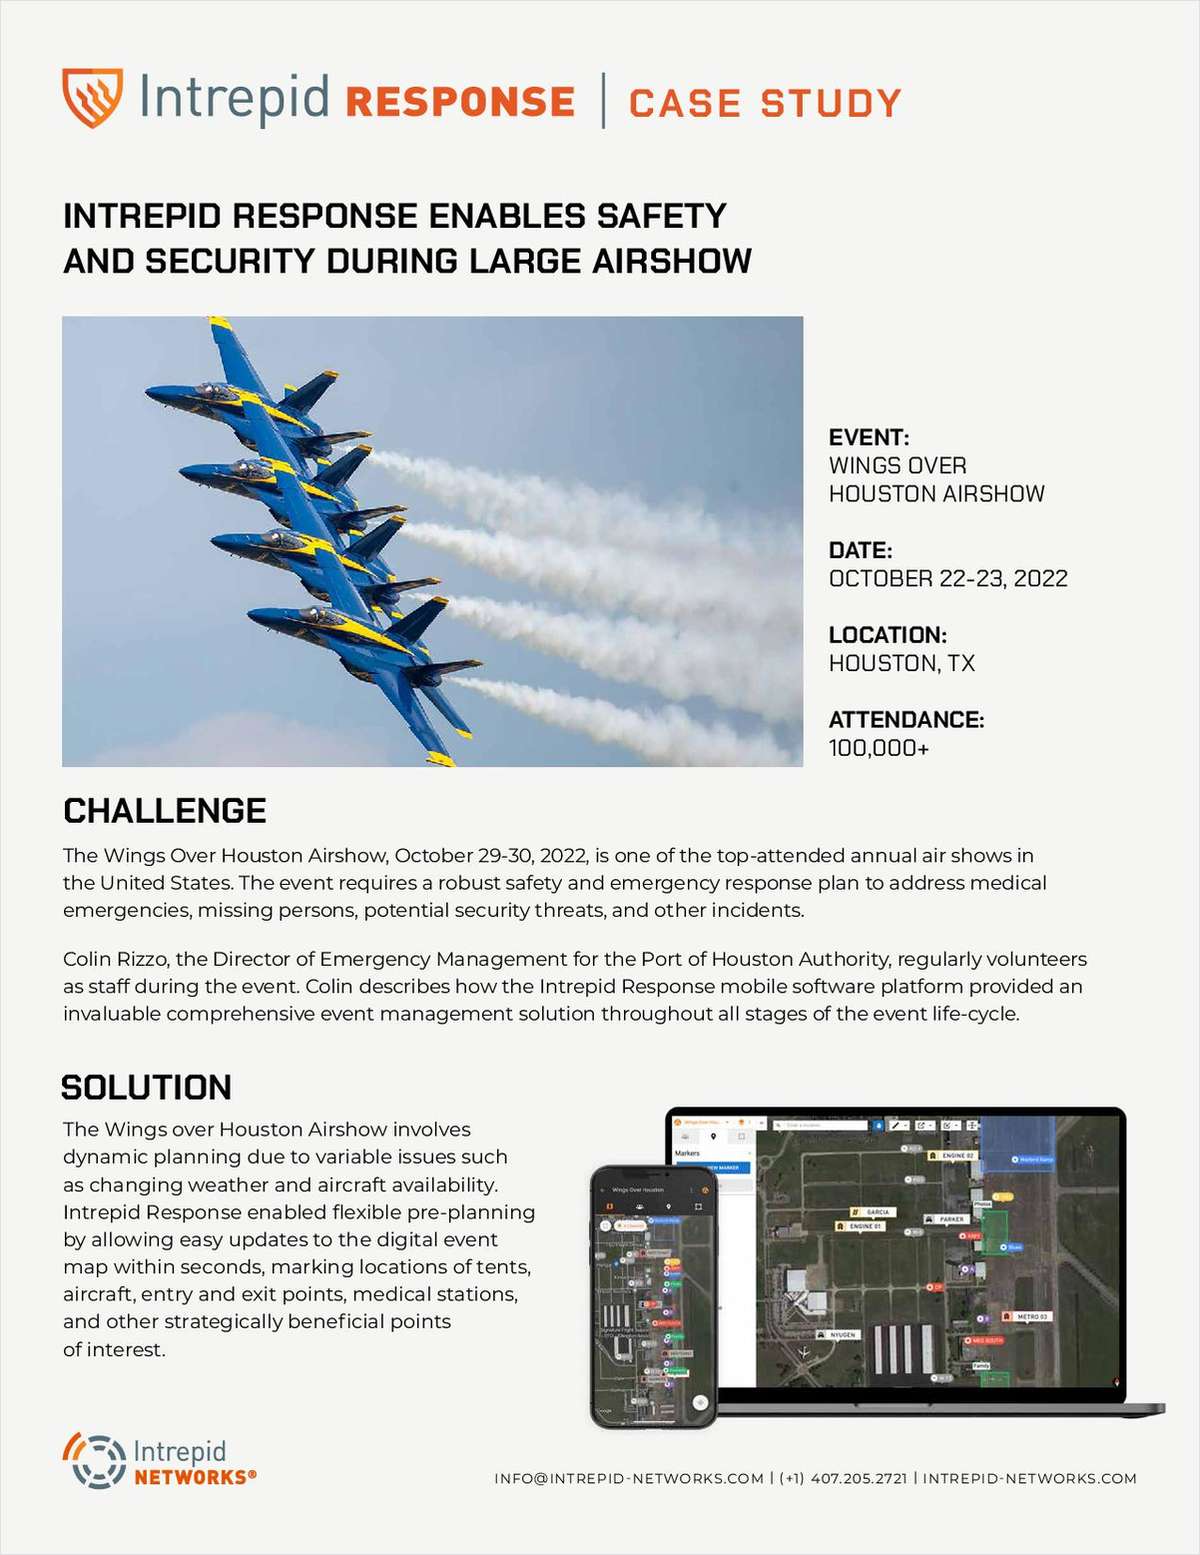 INTREPID RESPONSE ENABLES SAFETY AND SECURITY DURING LARGE AIRSHOW